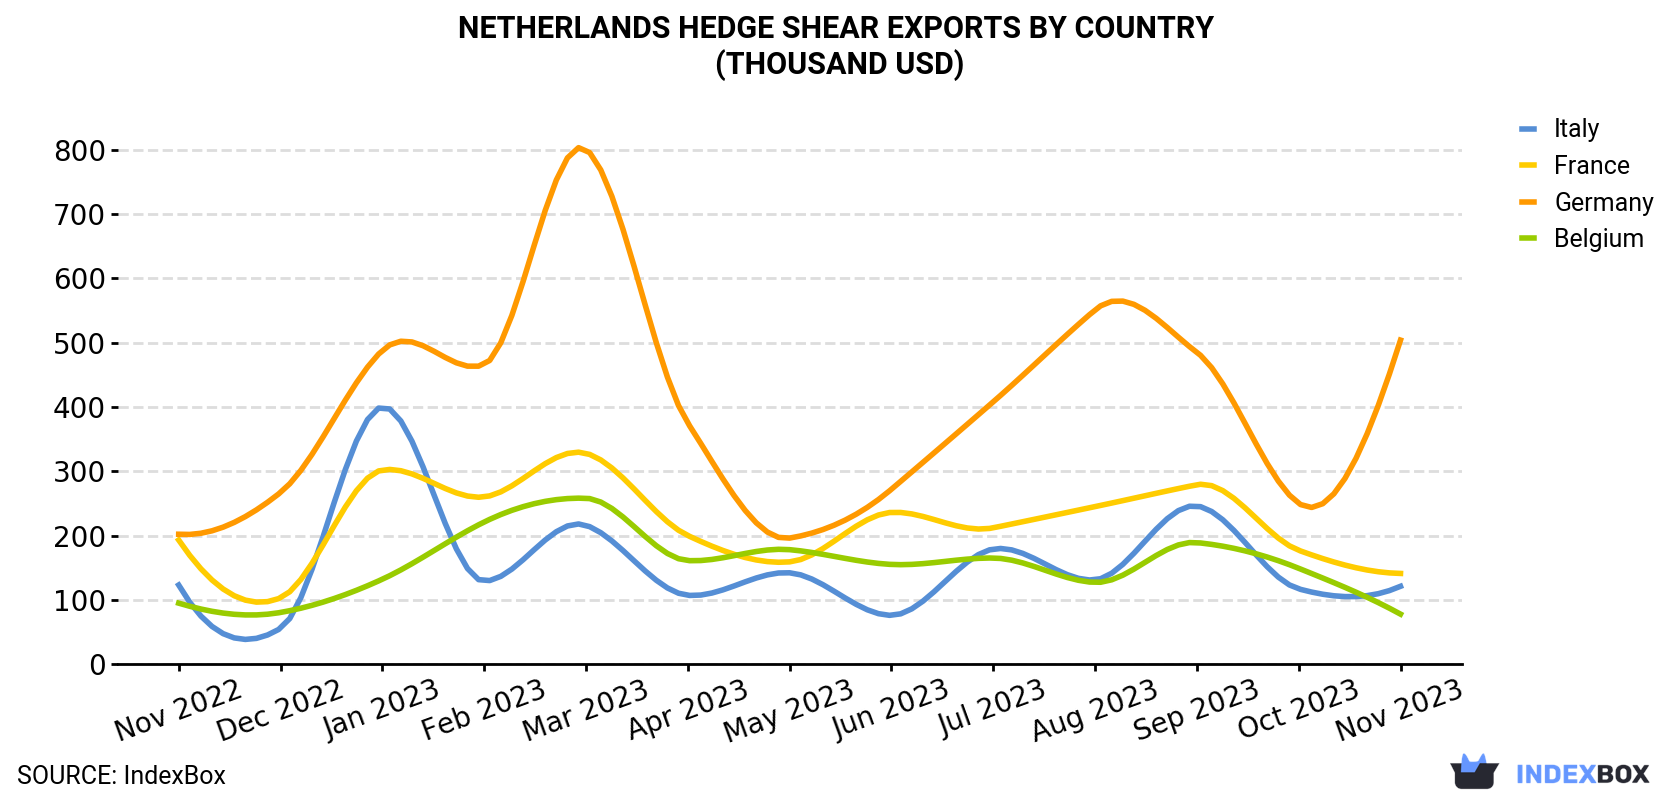 Netherlands Hedge Shear Exports By Country (Thousand USD)